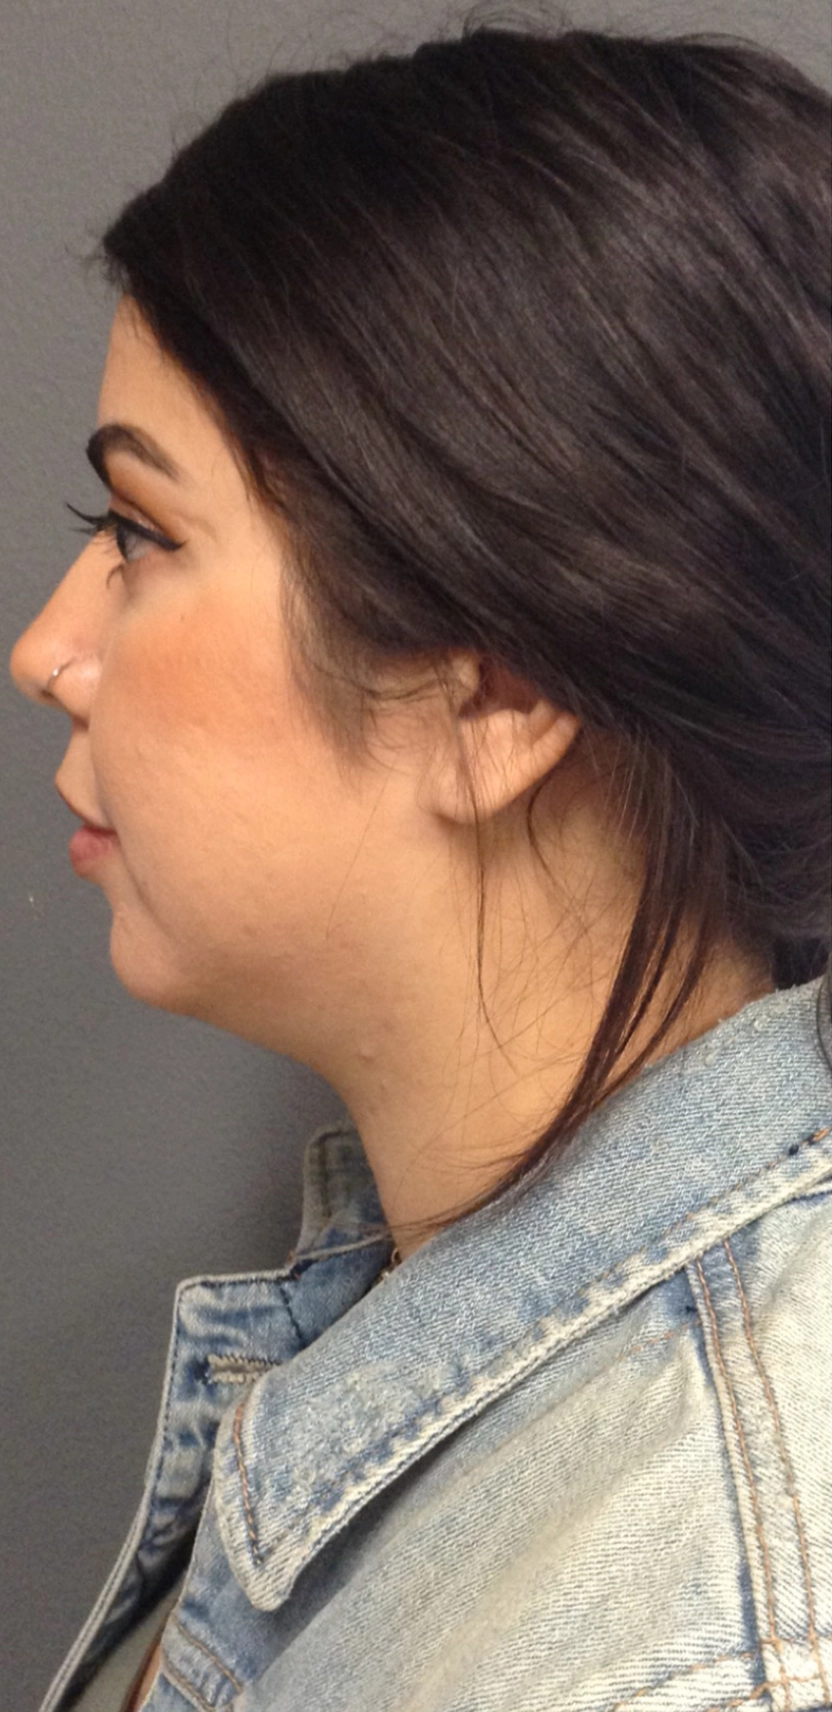 Chin before Kybella injections